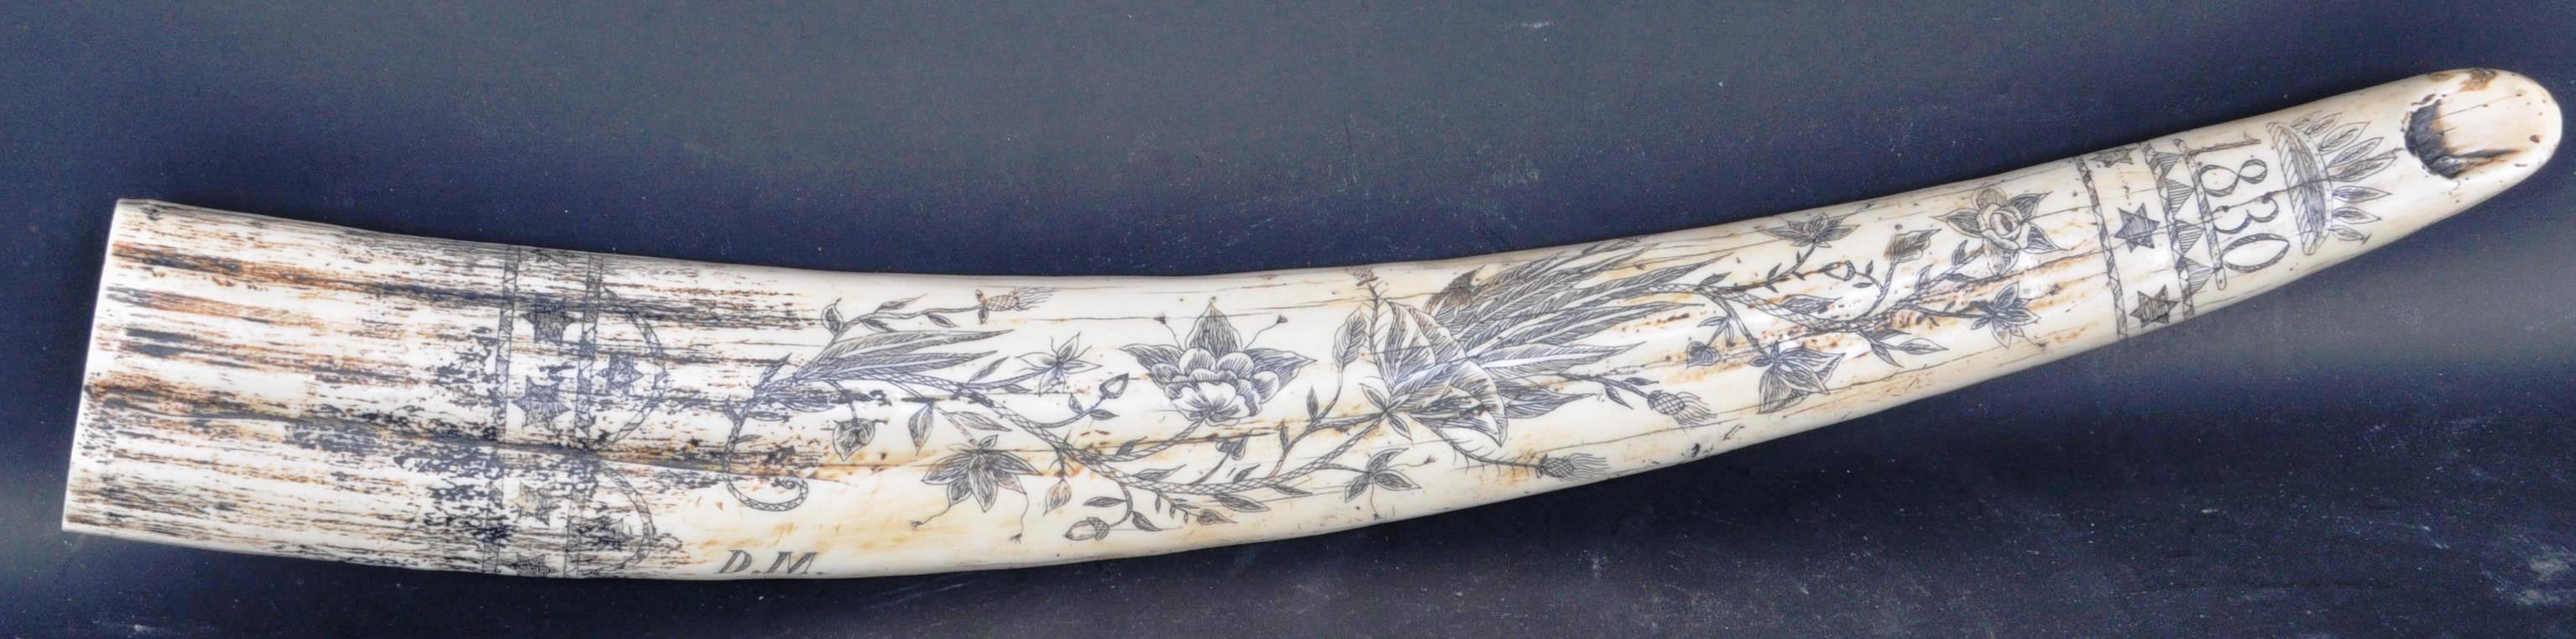 VINTAGE 20TH CENTURY RESIN REPRODUCTION SCRIMSHAW - Image 5 of 5